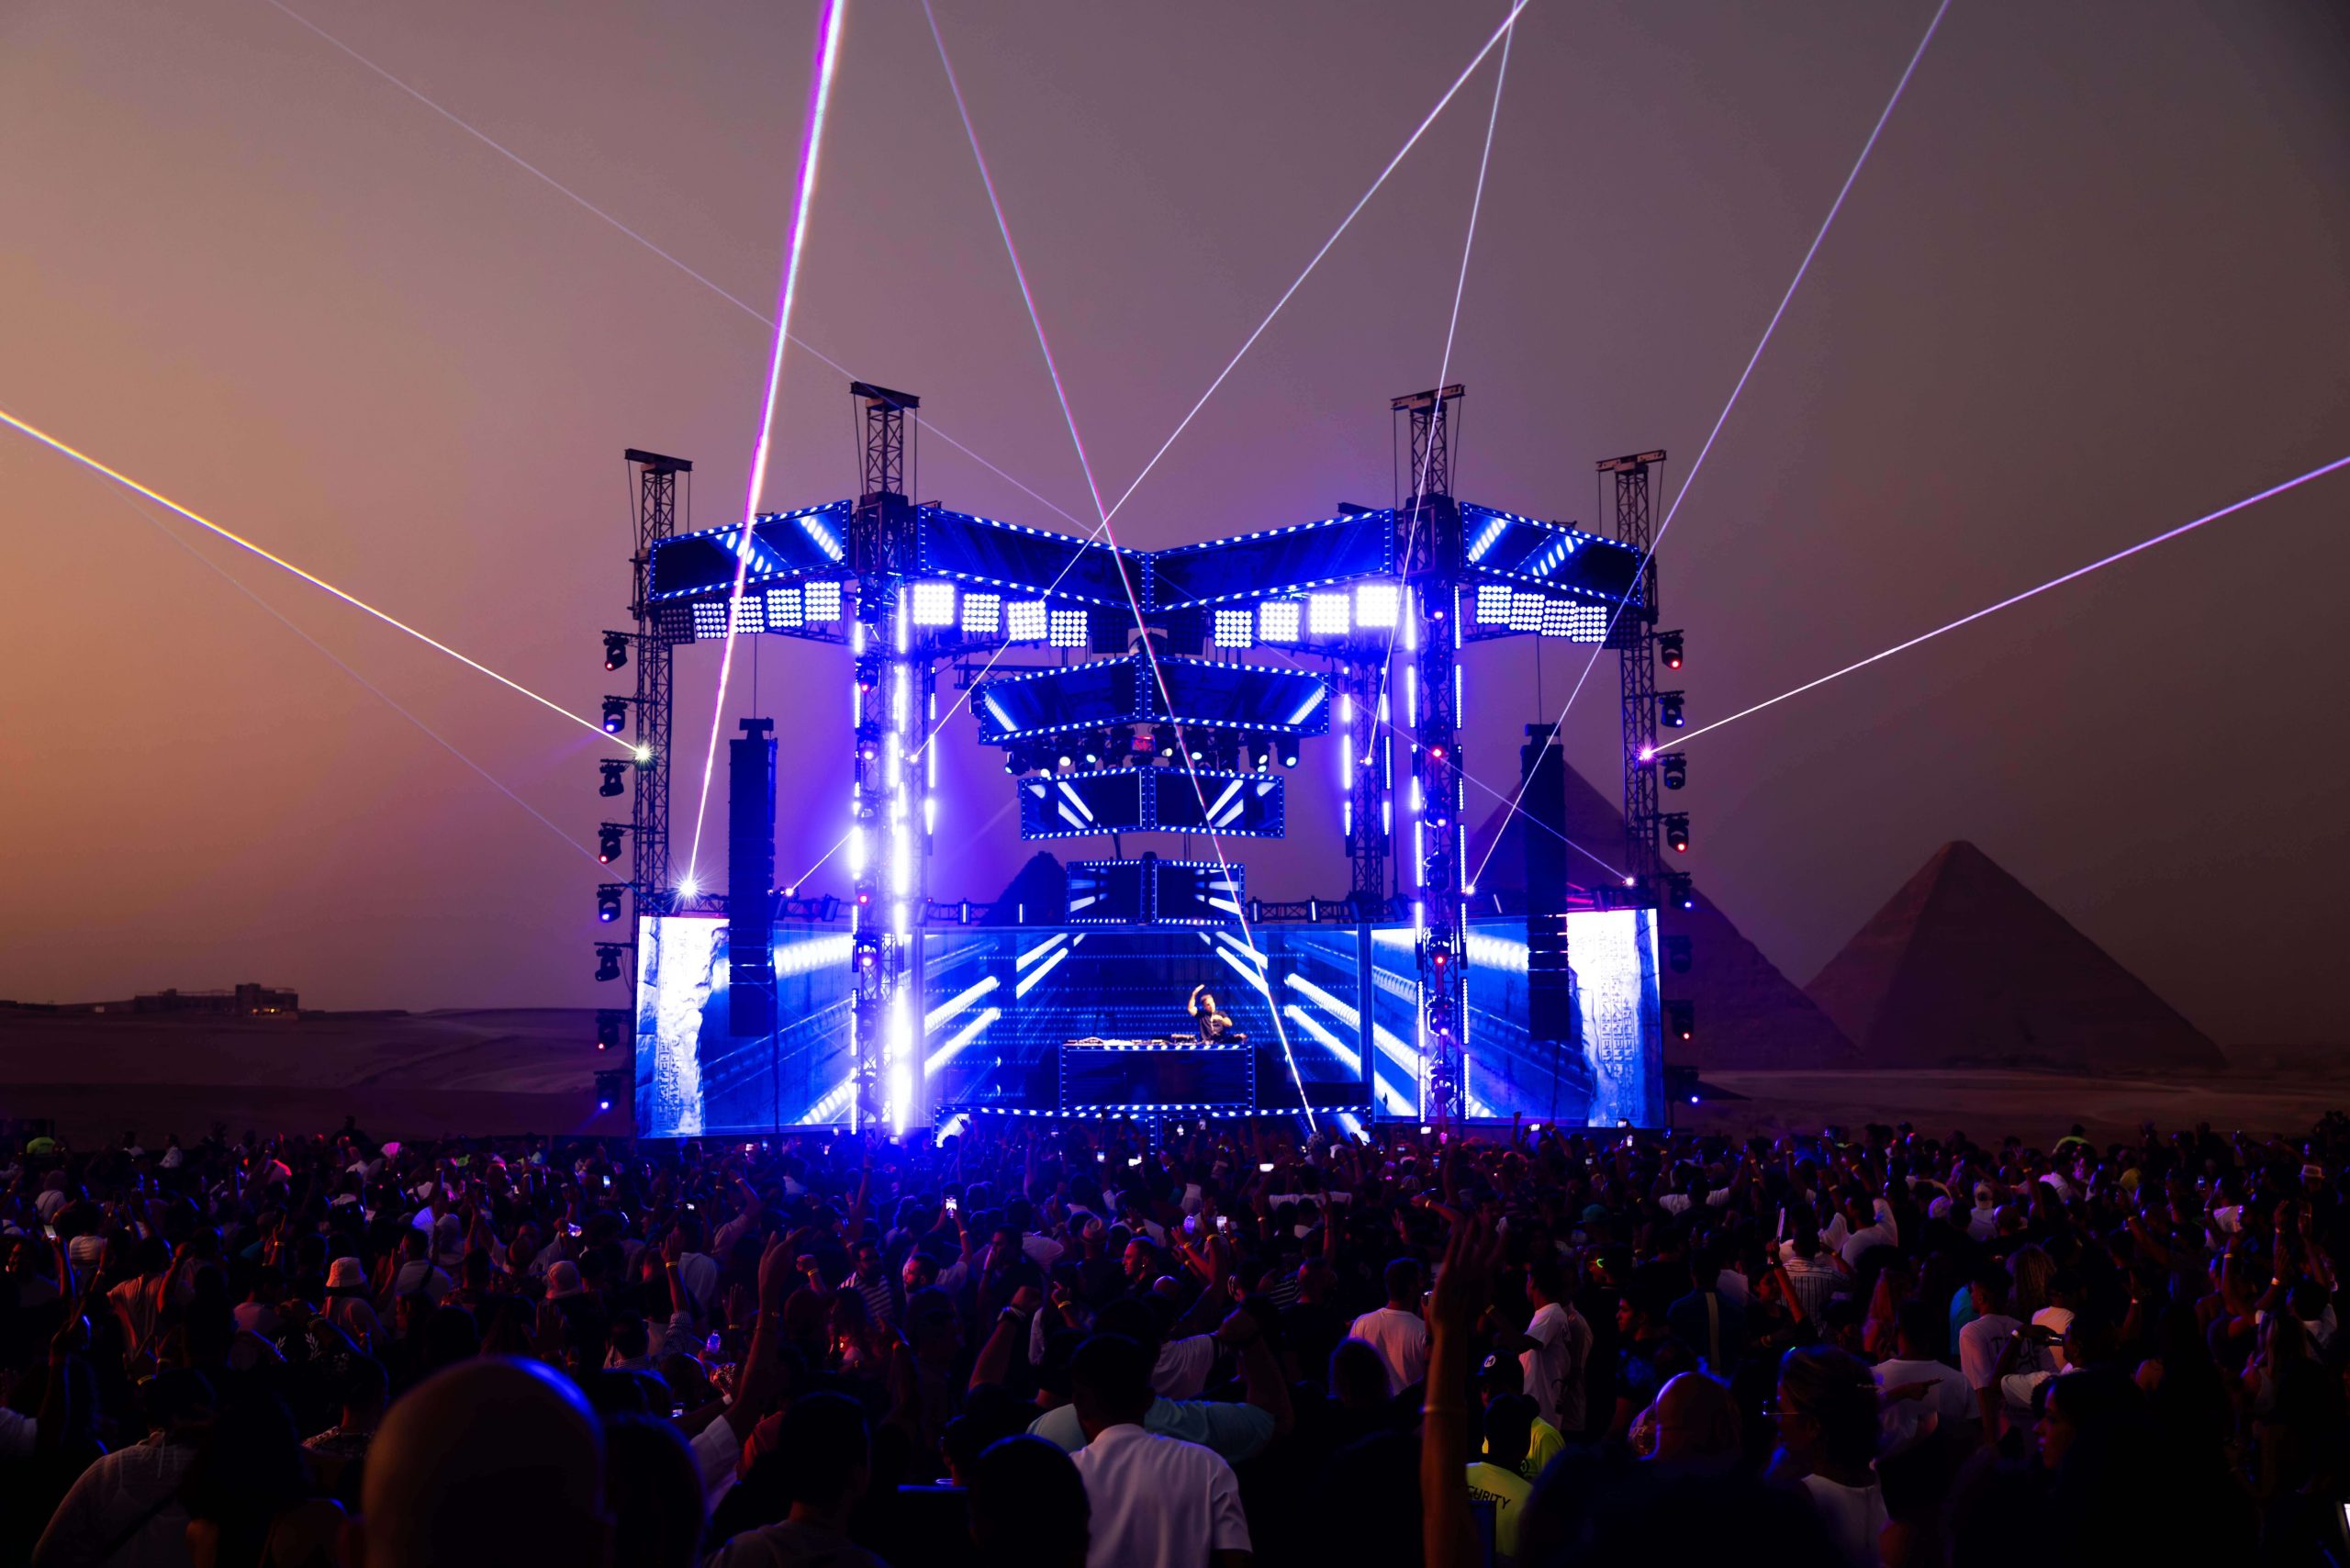 FSOE800 at The Great Pyramids of Giza: Aly & Fila put together historic event in stunning location